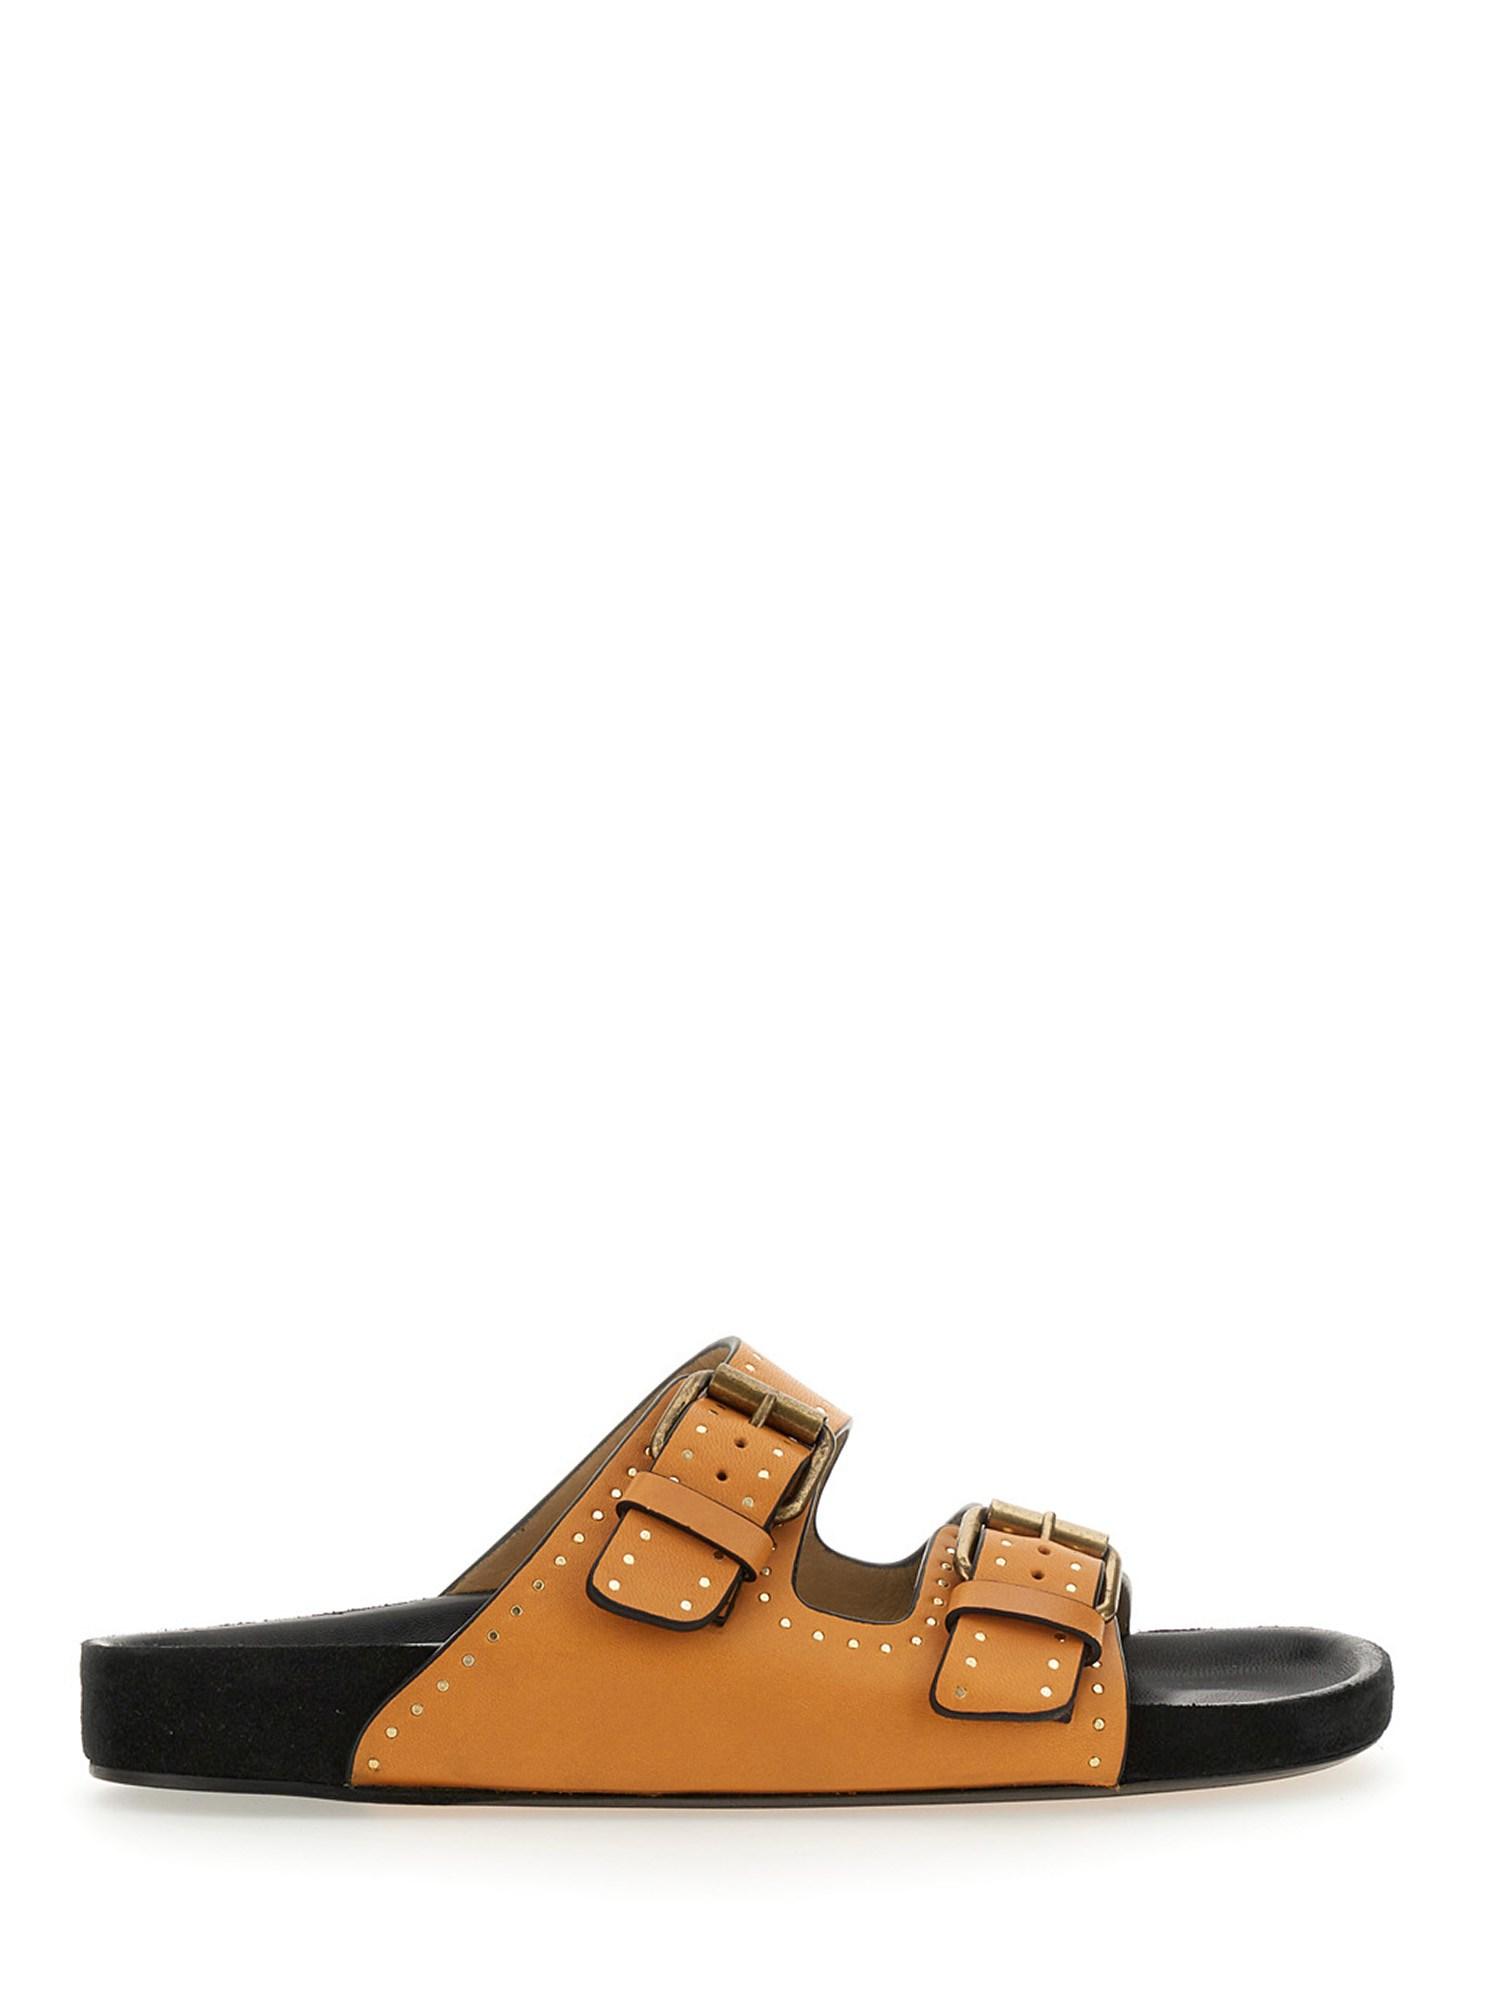 Isabel Marant Lennyo Sandal With Buckles in Brown | Lyst